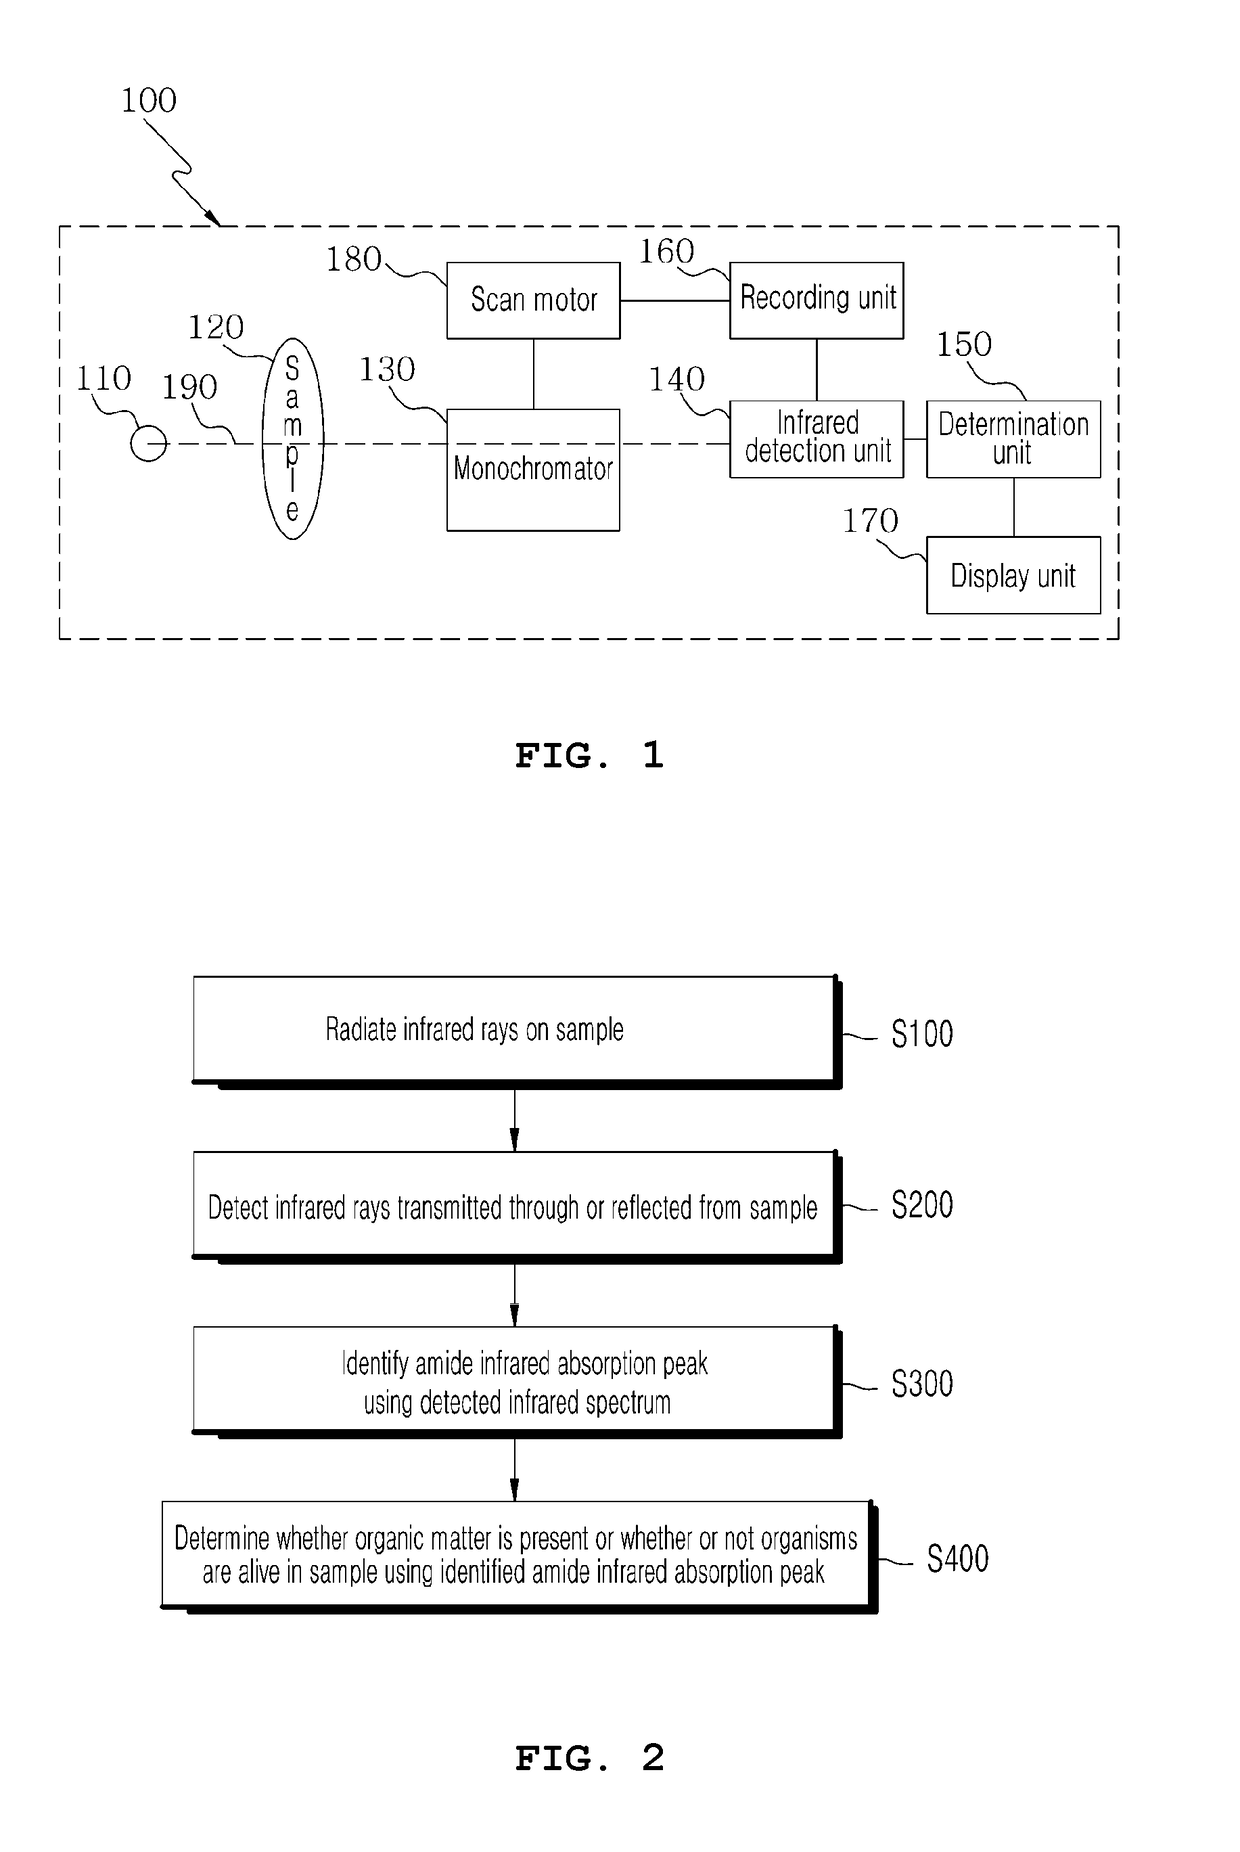 Apparatus and method for measuring presence of organic matter or life/death of living matter